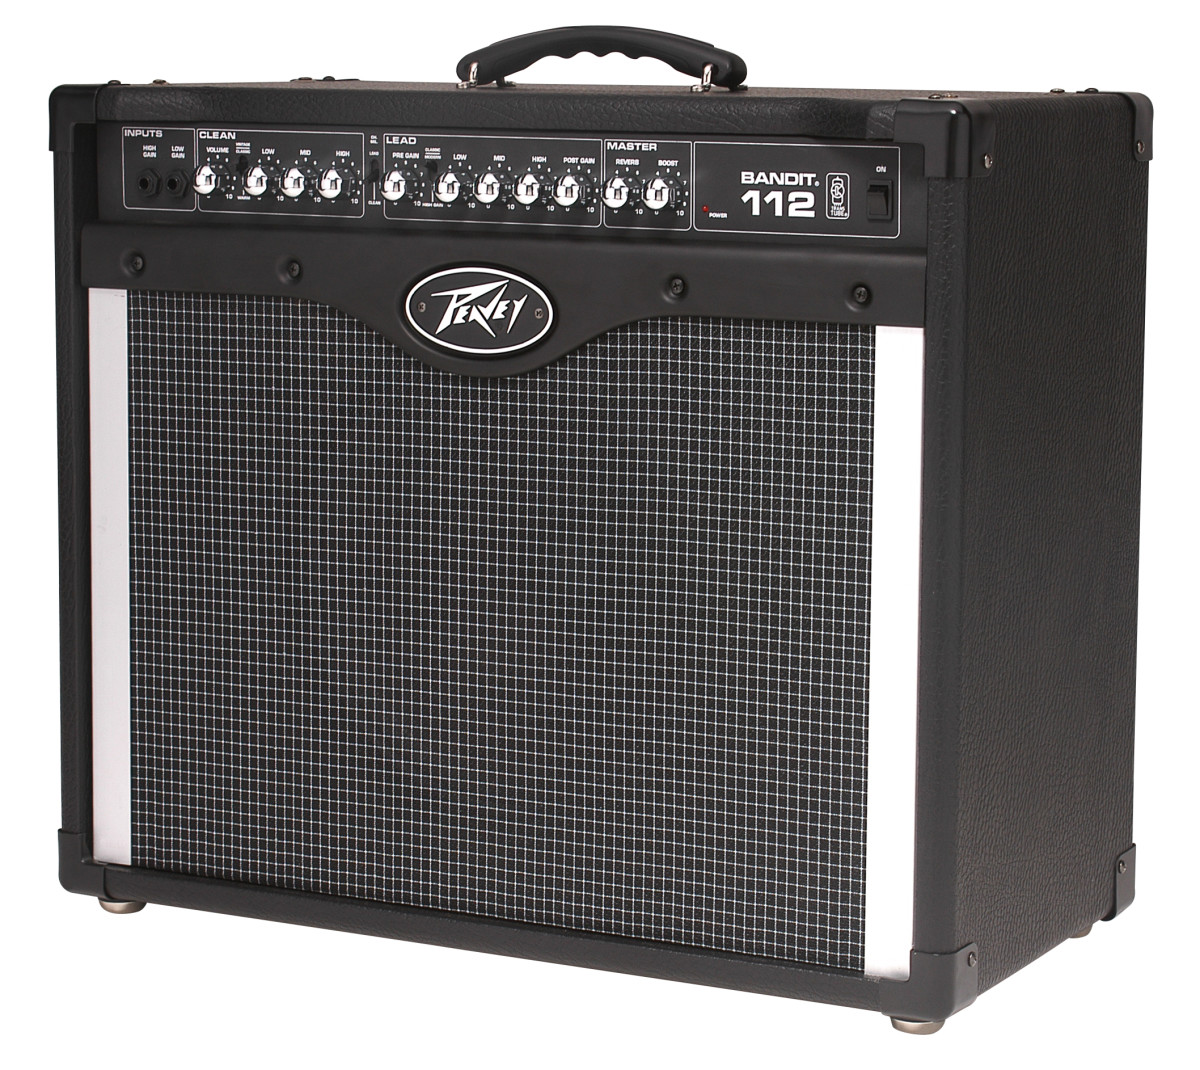 Best Small Guitar Amps for Practice and Home Use | Spinditty